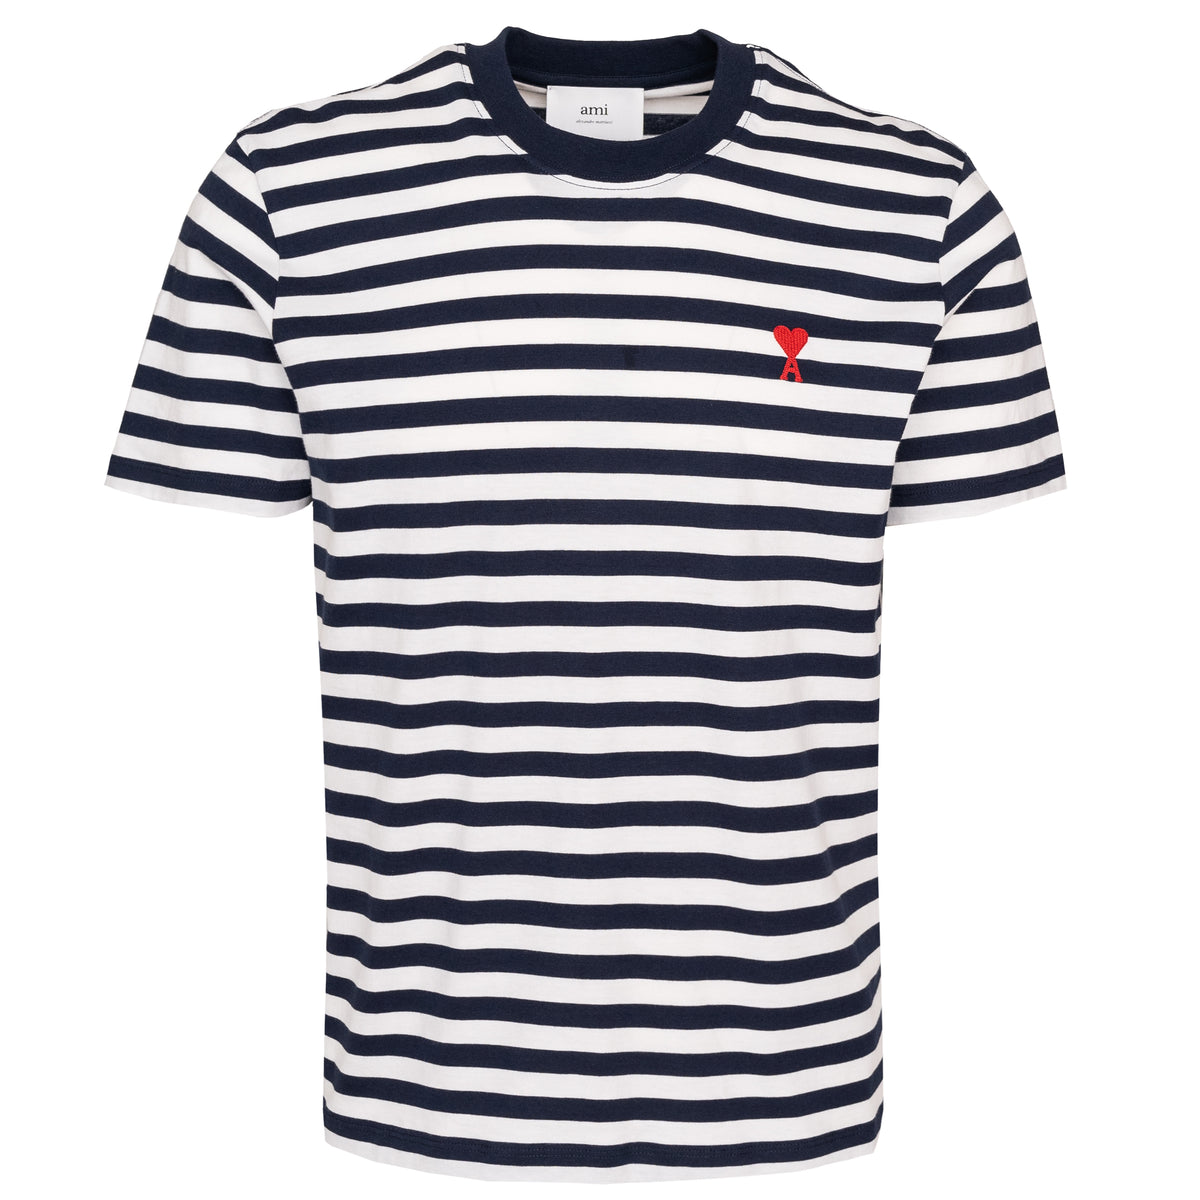 Load image into Gallery viewer, AMI Nautical Blue/White Stripe De Coeur Tee
